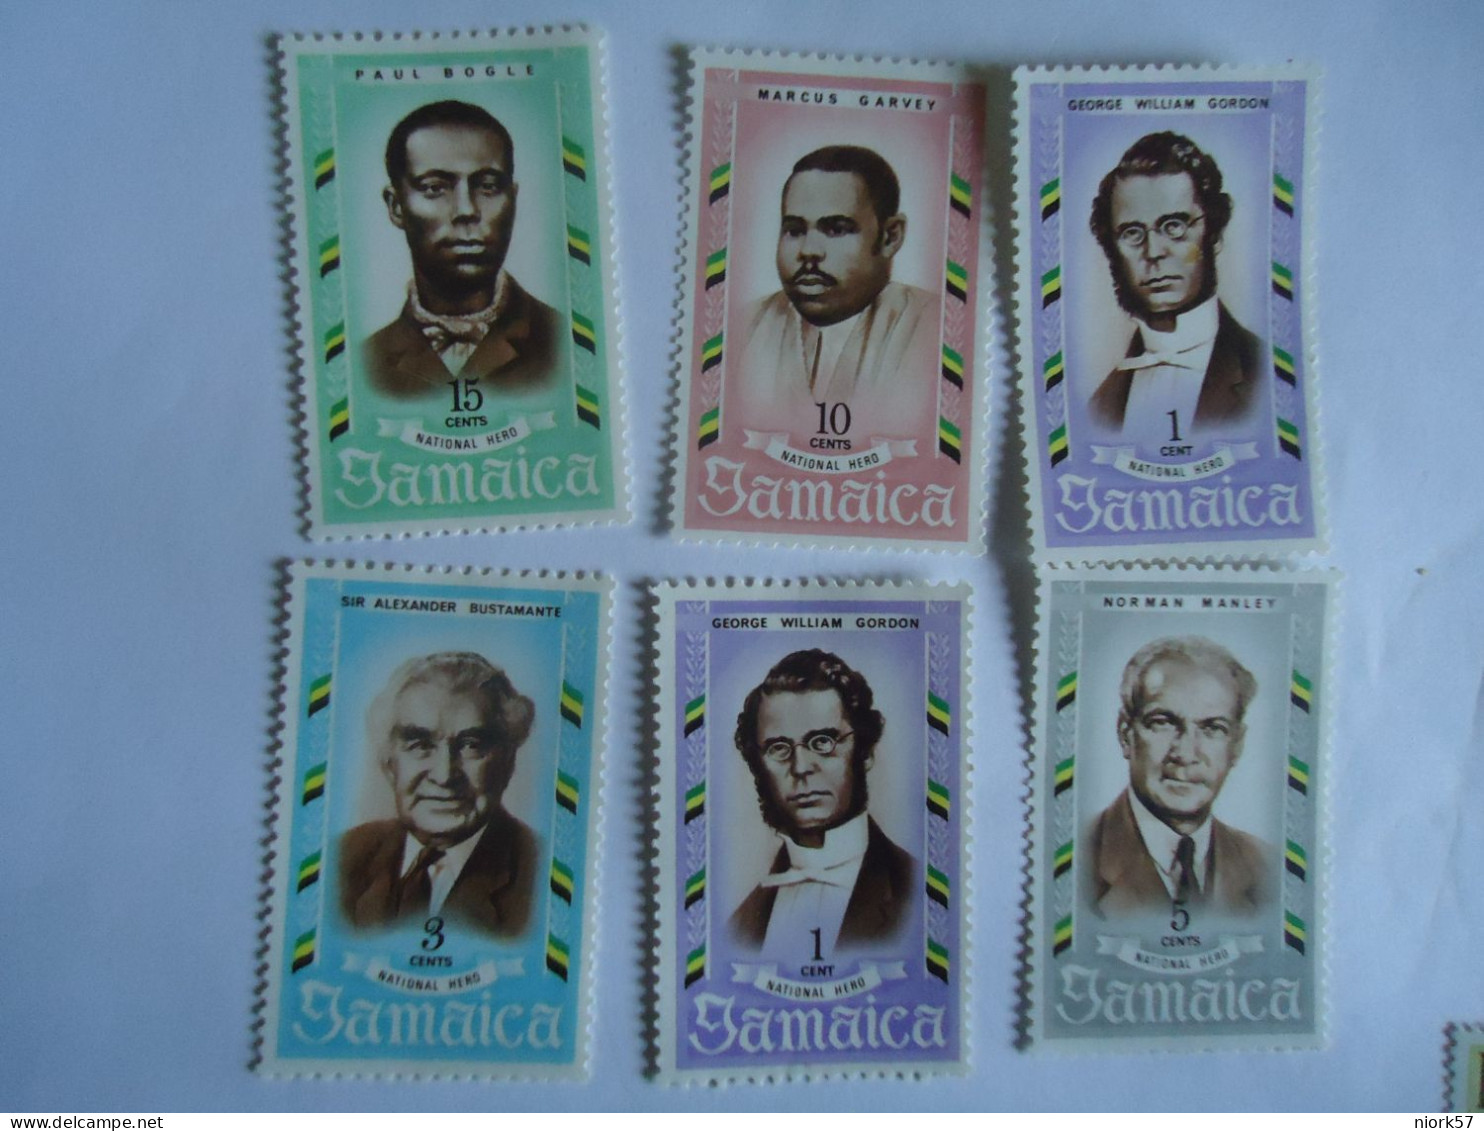 JAMAICA MNH  6  STAMPS FAMOUS PEOPLES  NATIONALE HEROES - Jamaica (1962-...)